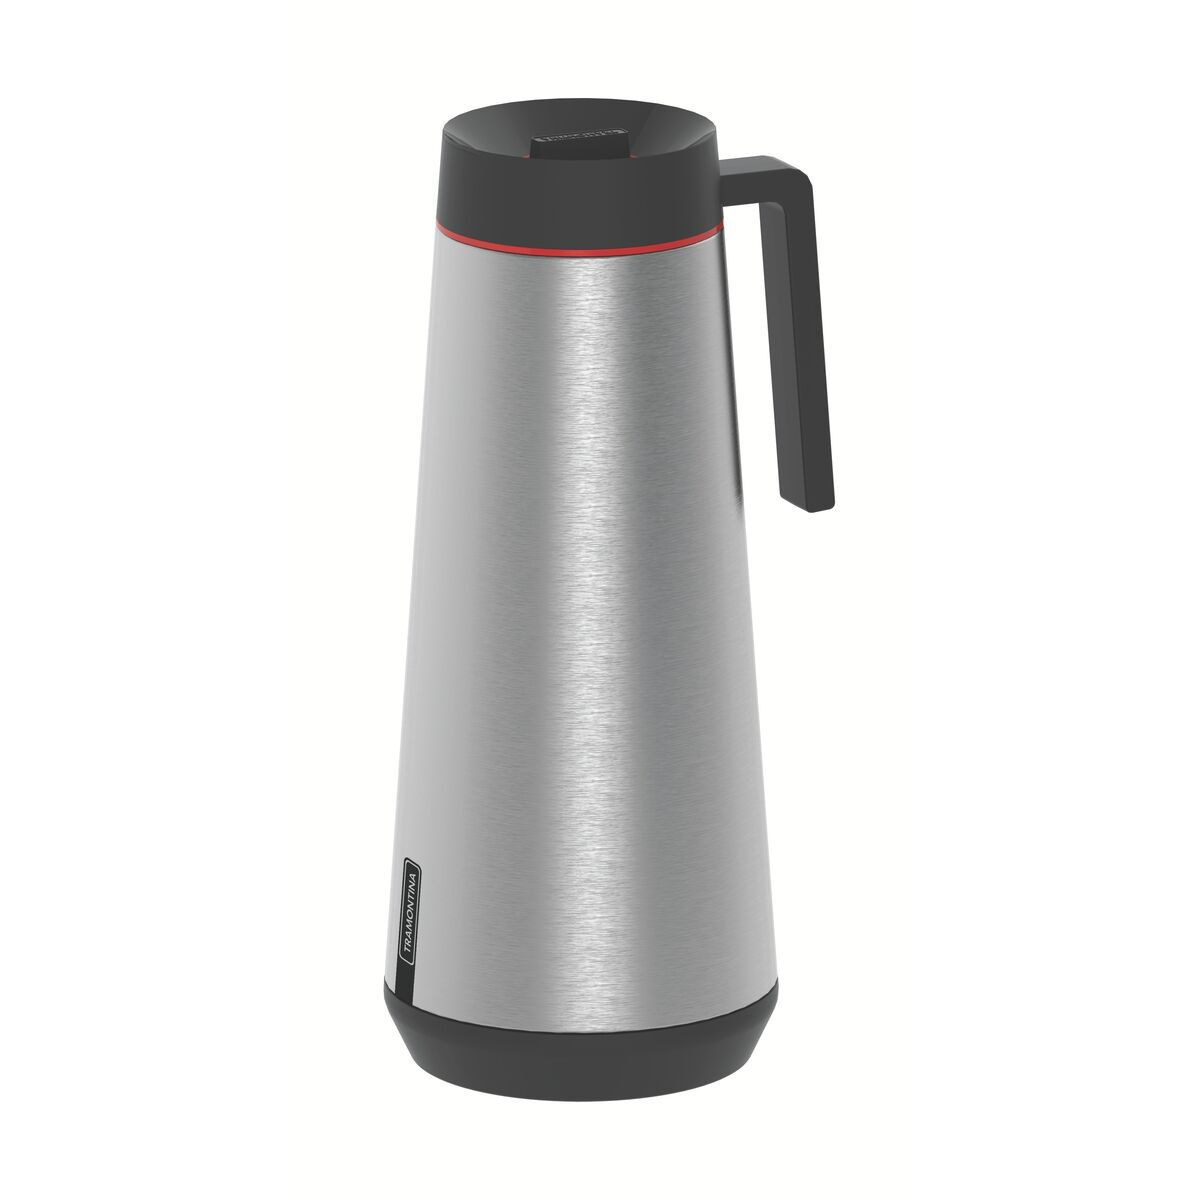 Tramontina Exata 1 L stainless steel thermal tea and coffee pot